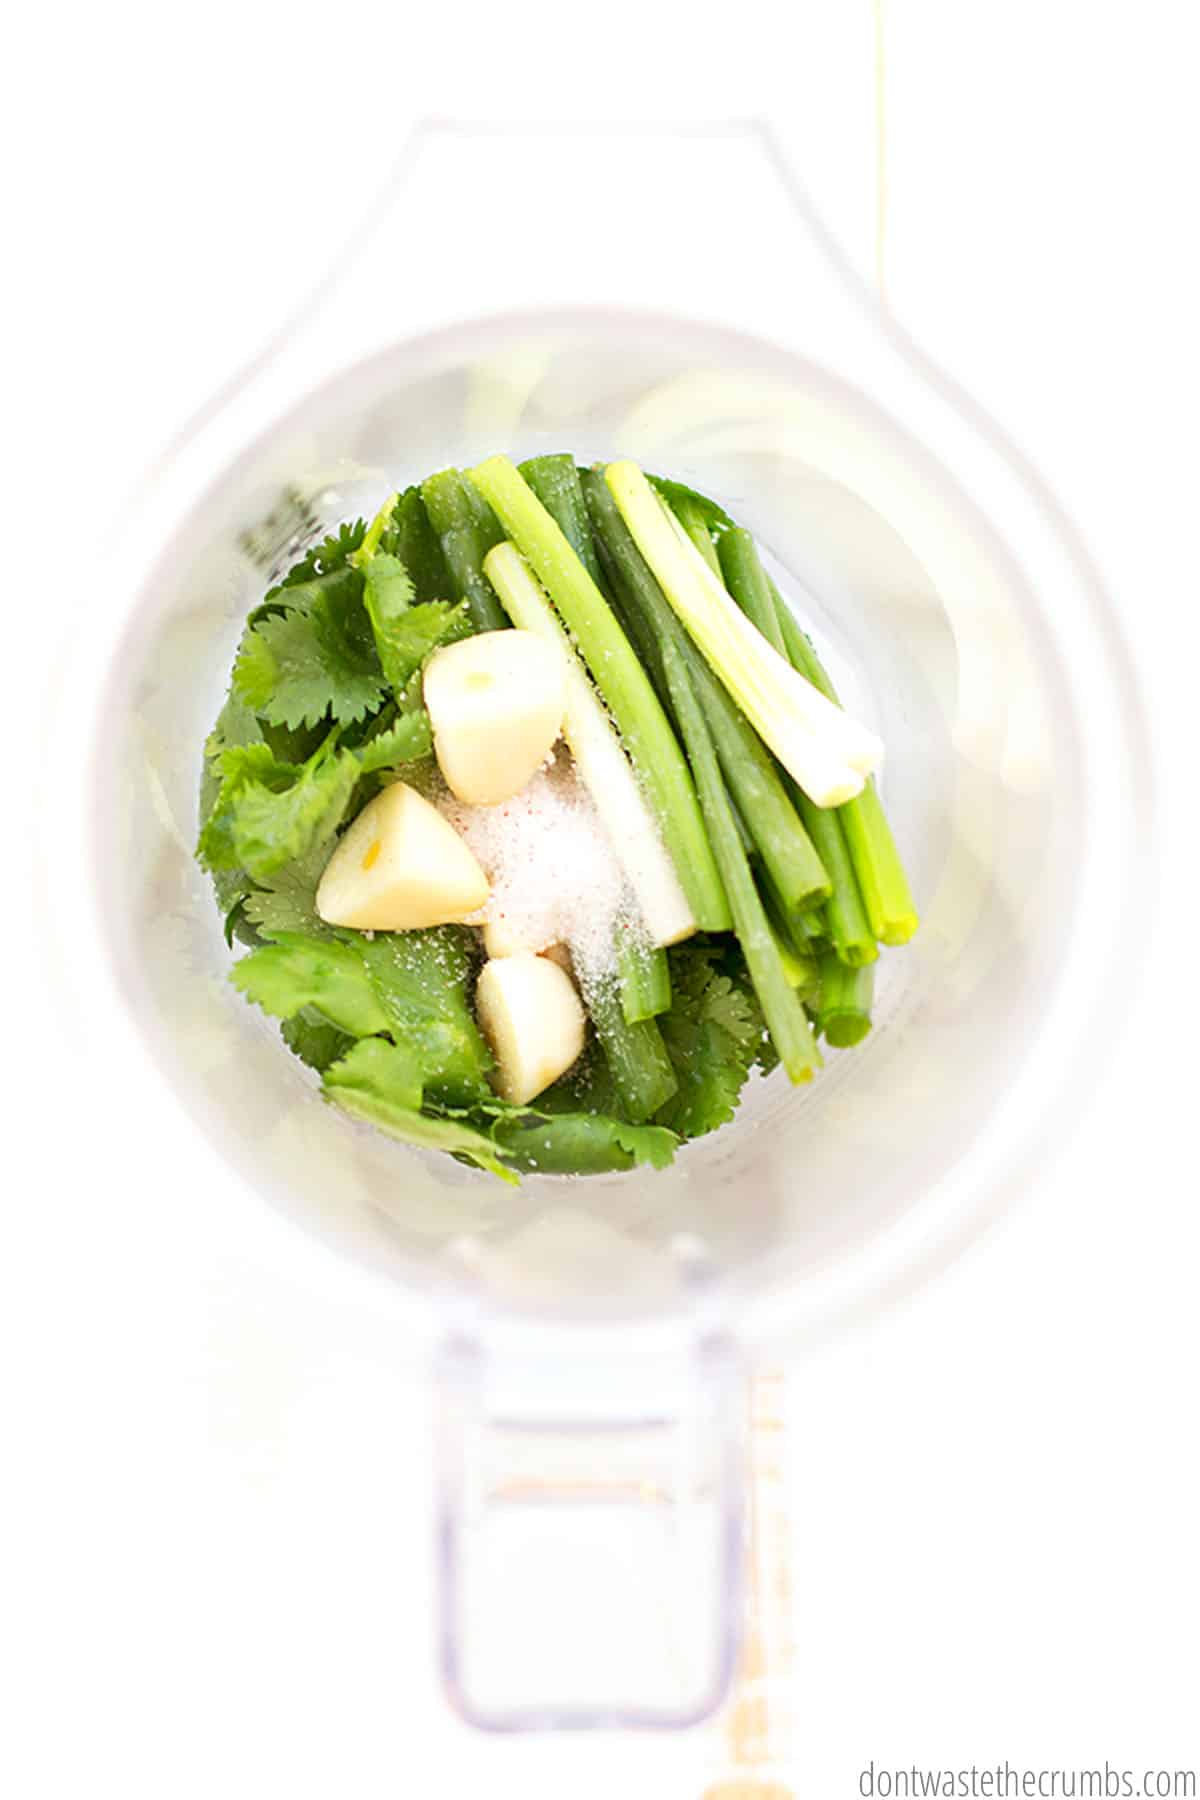 A blender is filled with green onions, garlic cloves, and cilantro, and a sprinkling of salt.